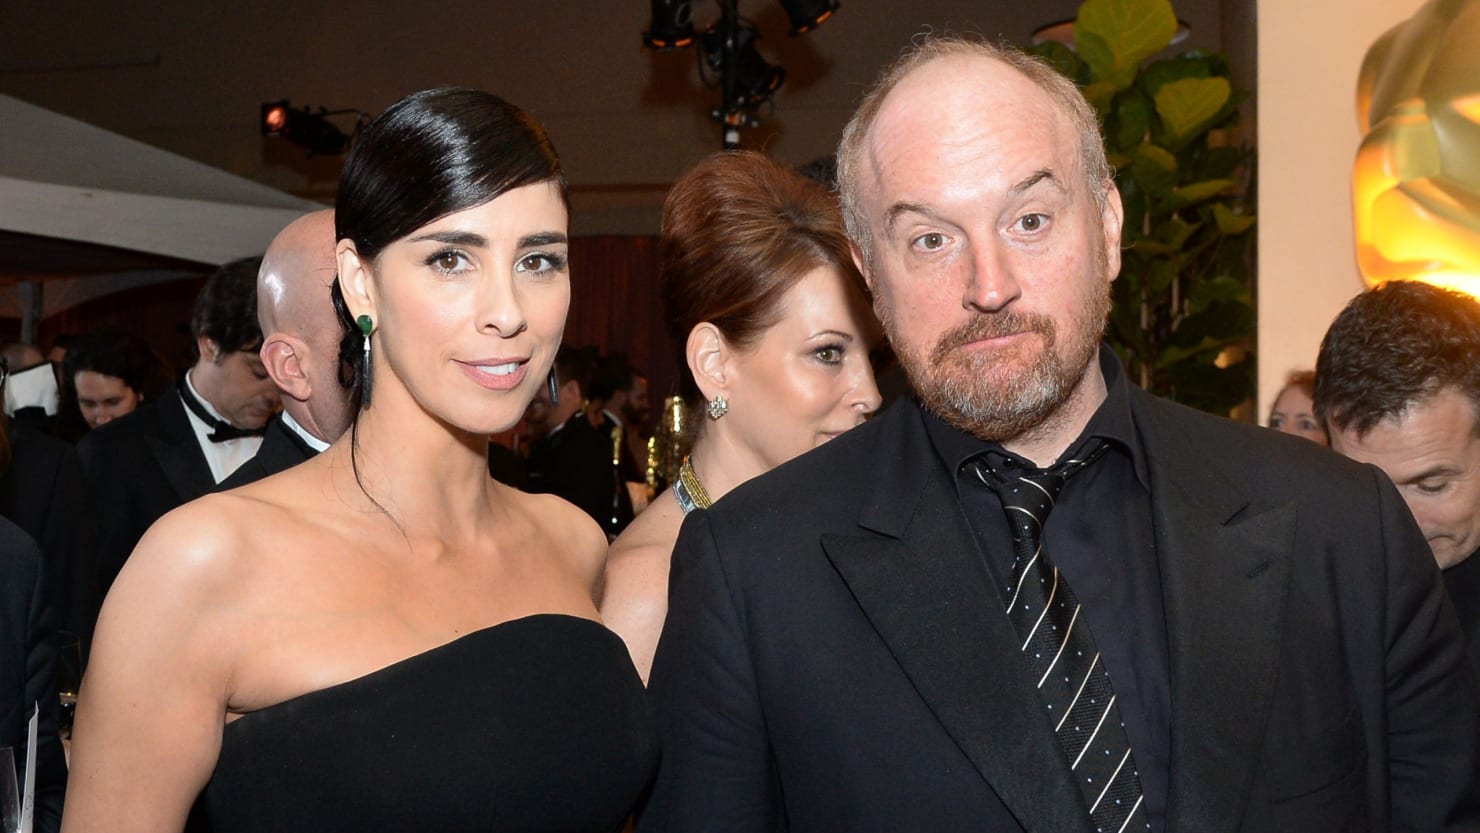 Sarah Silverman: Louis C.K. Masturbated in Front of Me With My Consent